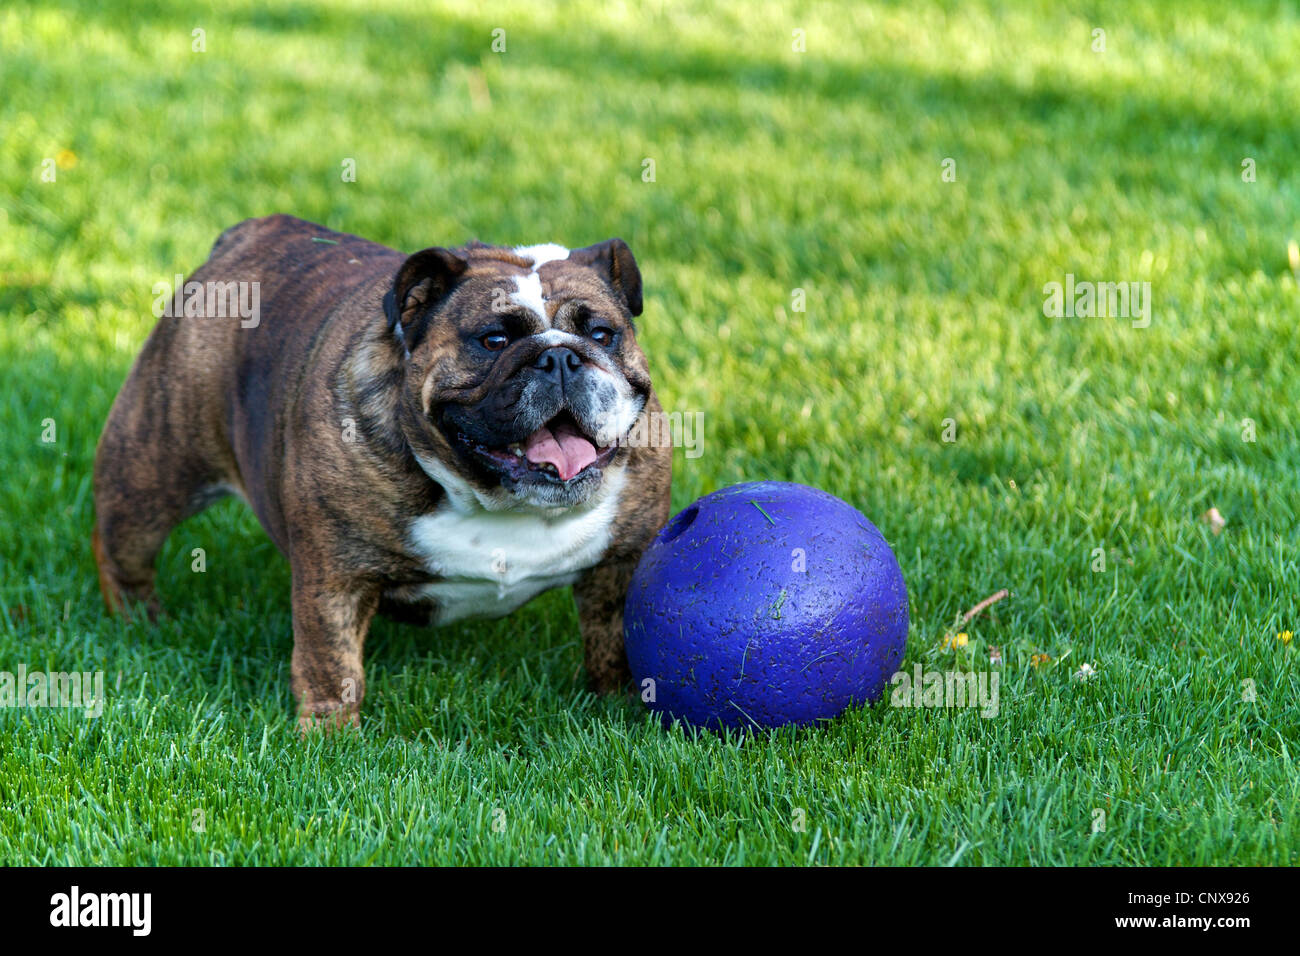 English Bulldog outside in the grass with purple ball Stock Photo